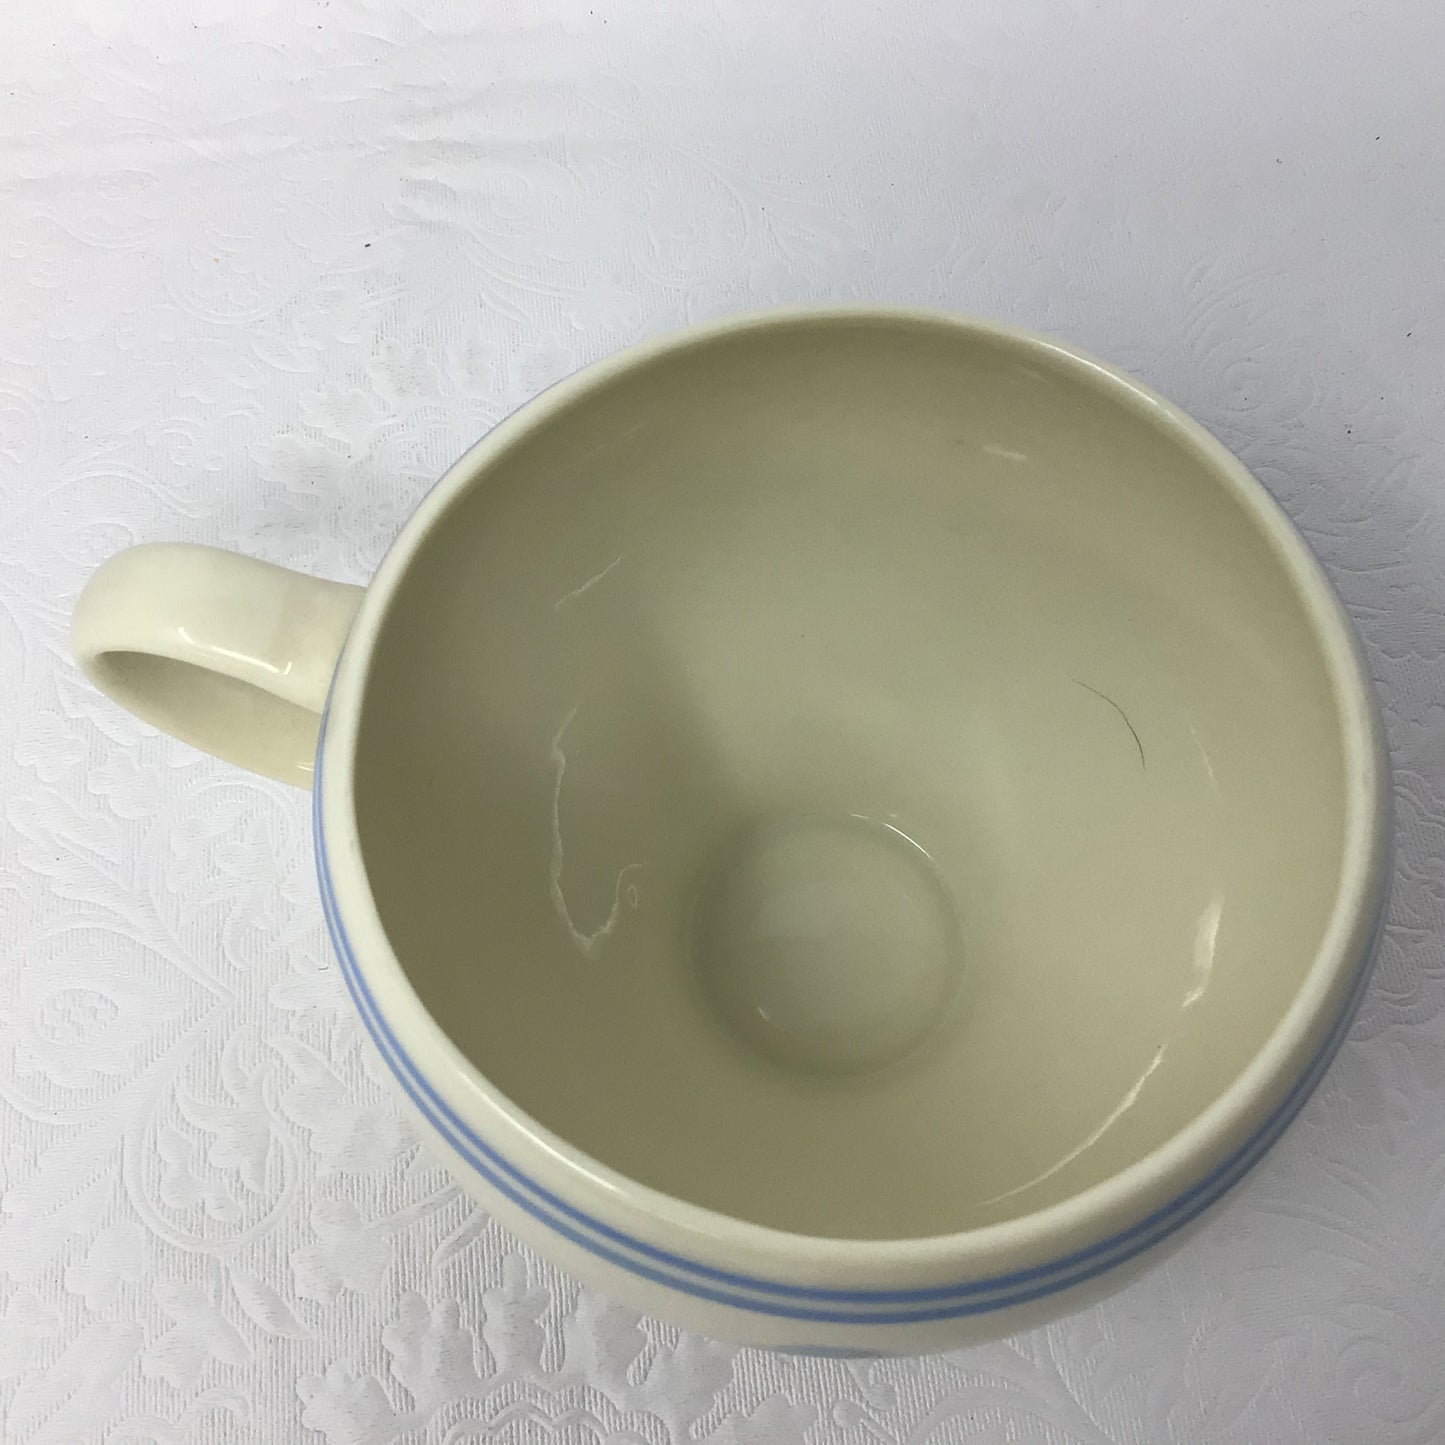 The Pooh Pantry Tea Cup by Lenox